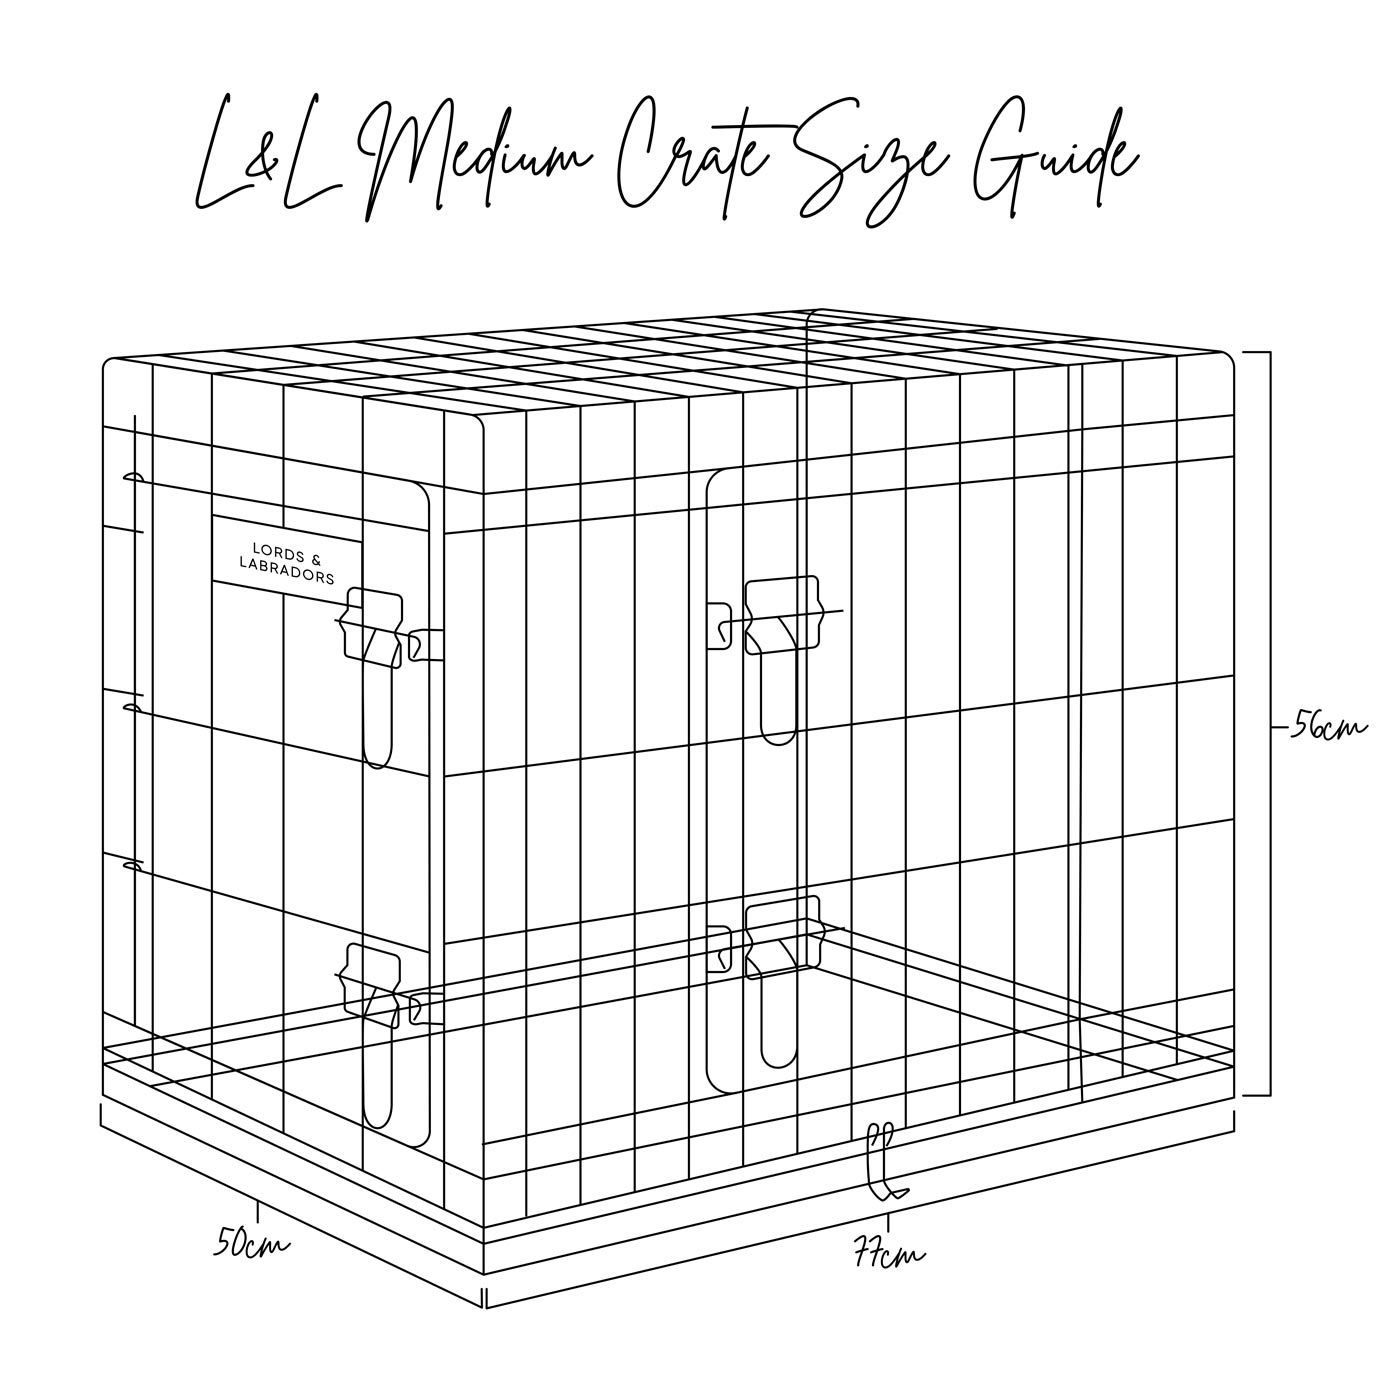 Lords and Labradors medium crate size guide illustration